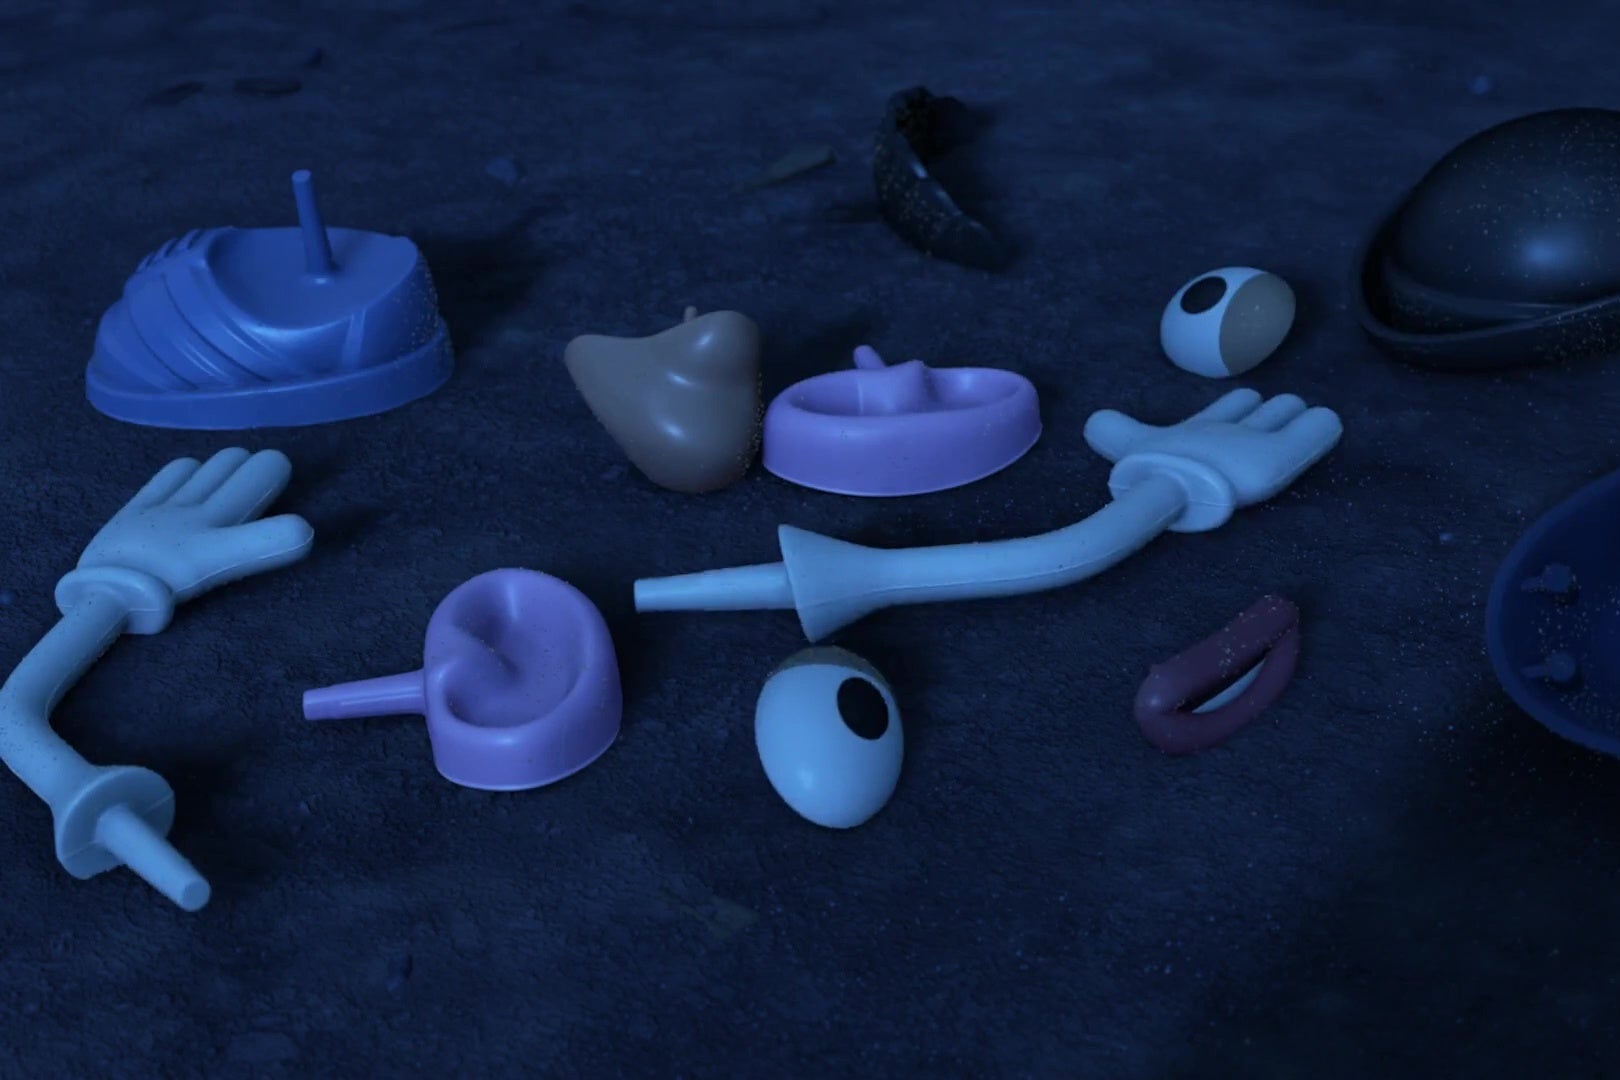 A bunch of Mr. Potato Head pieces spread out on a carpet.